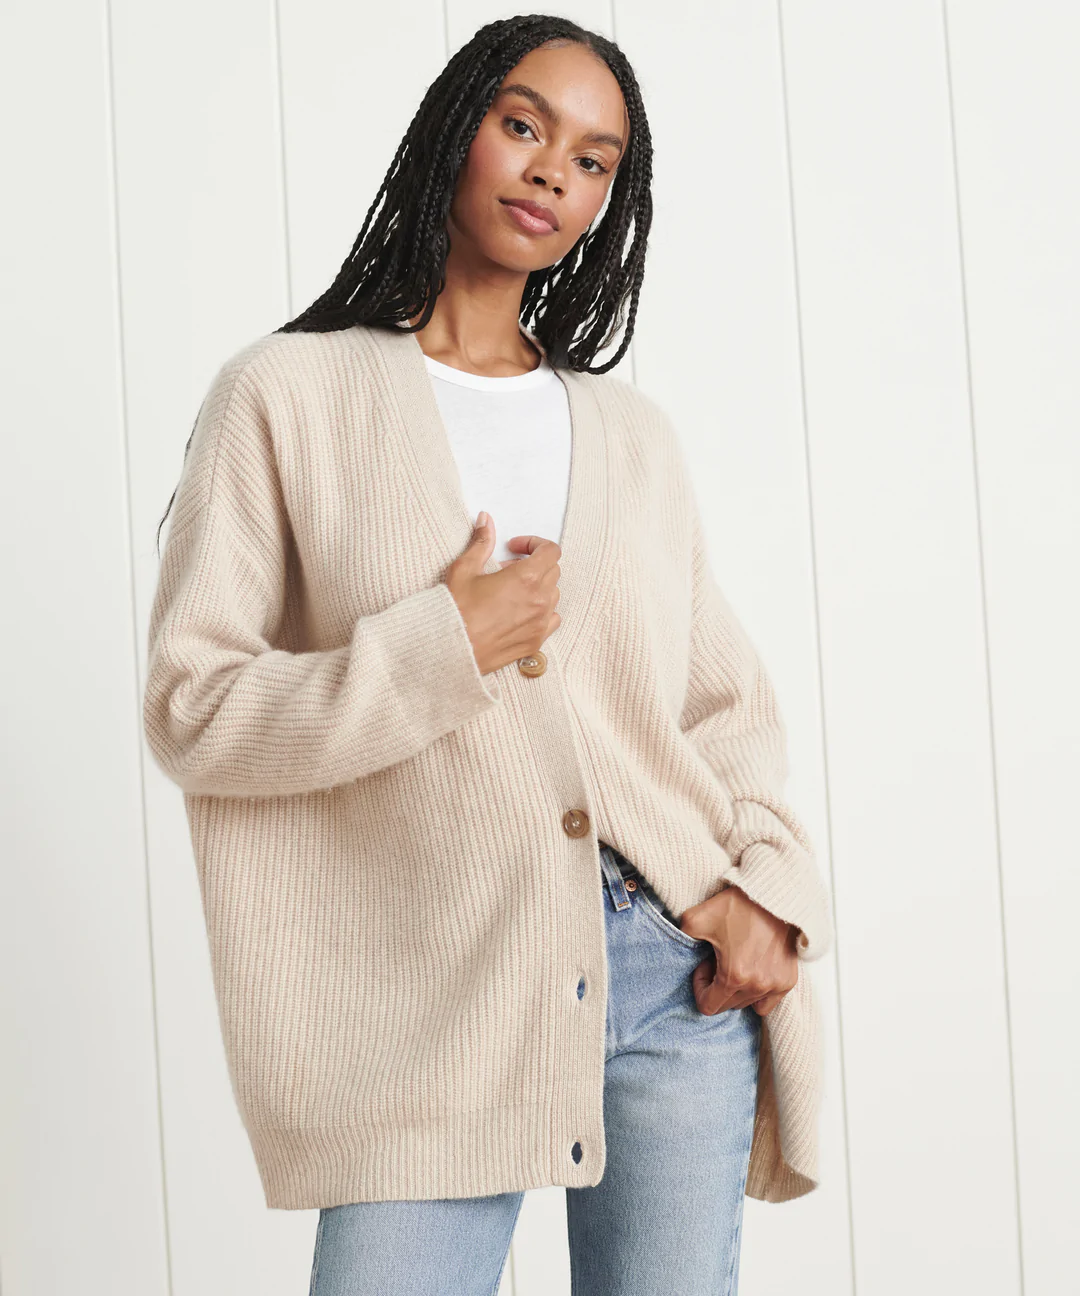 Chain Detail Cashmere Sweater - Women - Ready-to-Wear